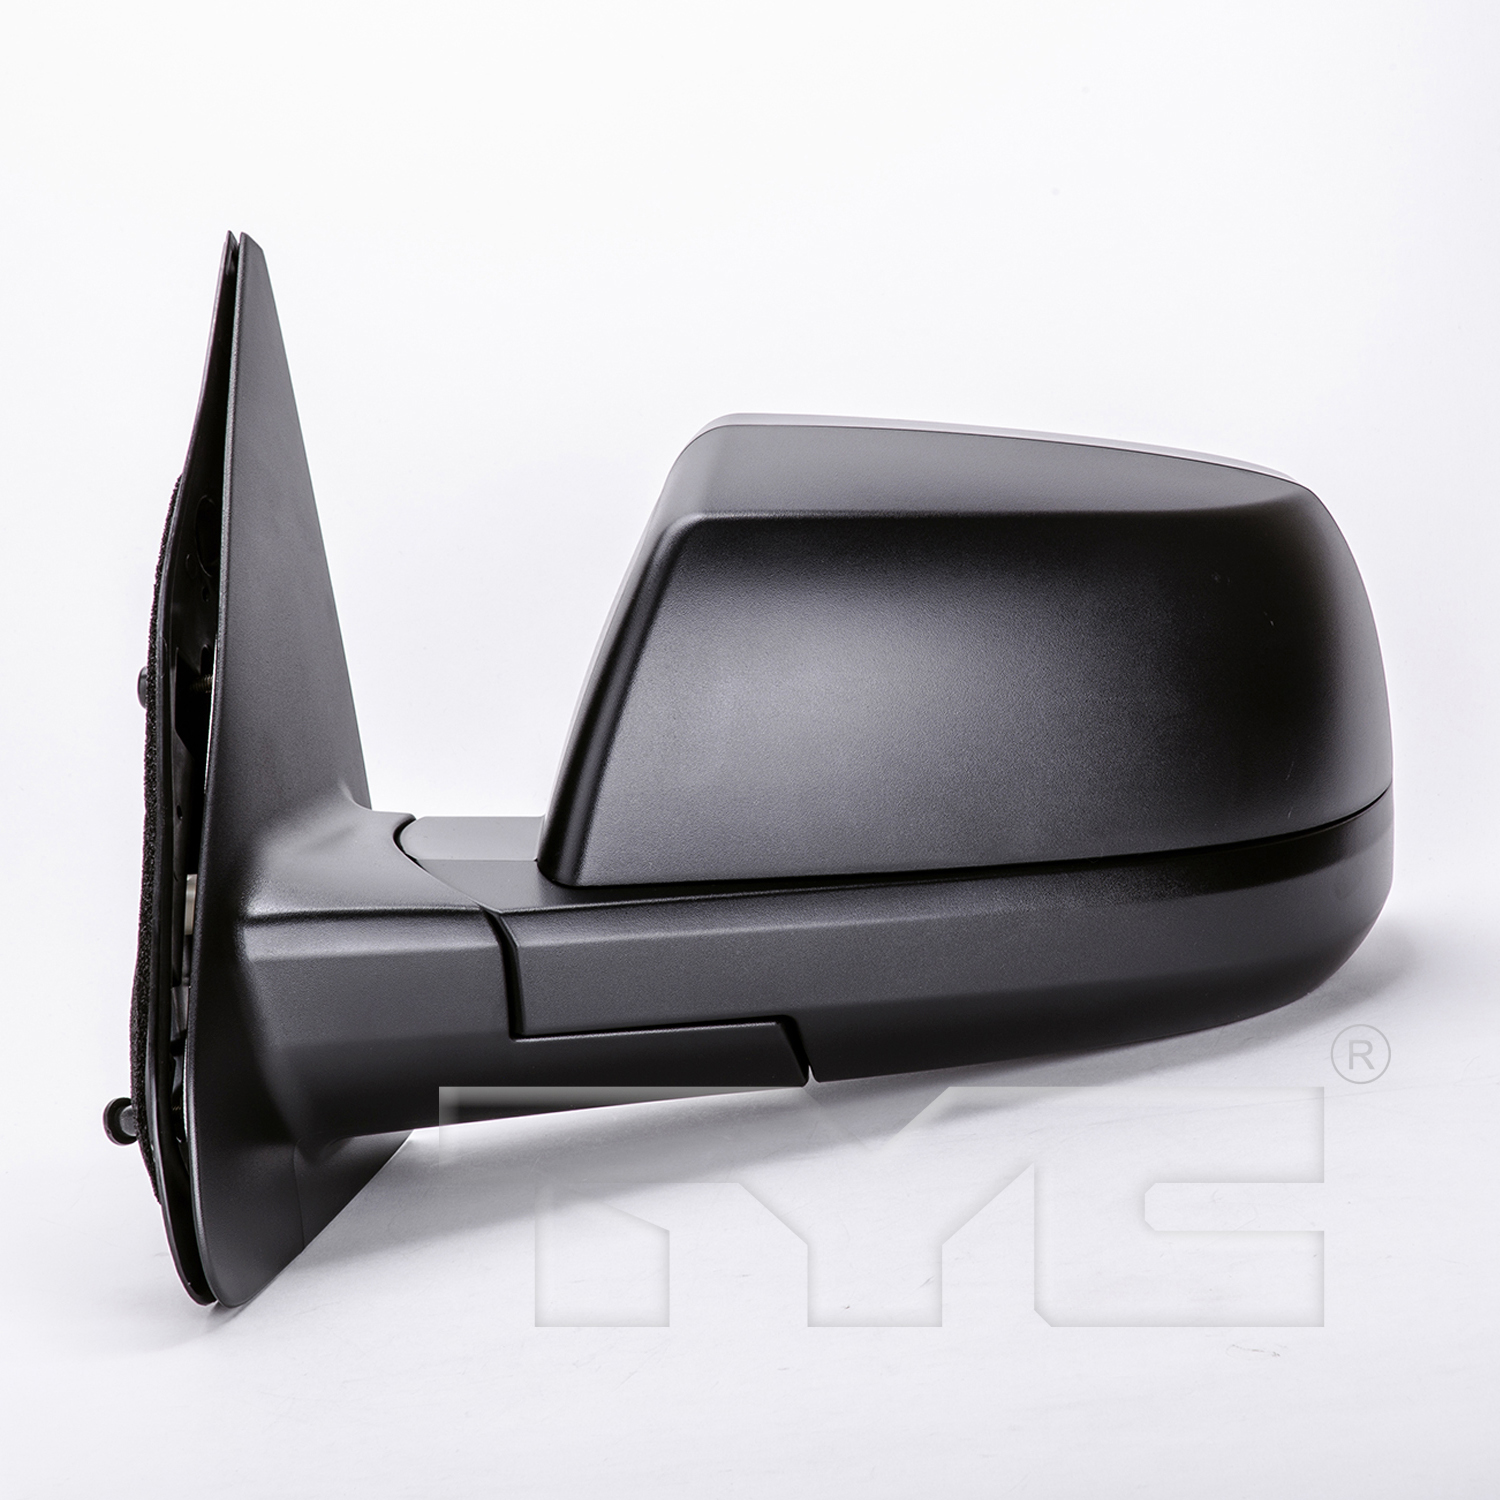 Aftermarket MIRRORS for TOYOTA - TUNDRA, TUNDRA,07-13,LT Mirror outside rear view